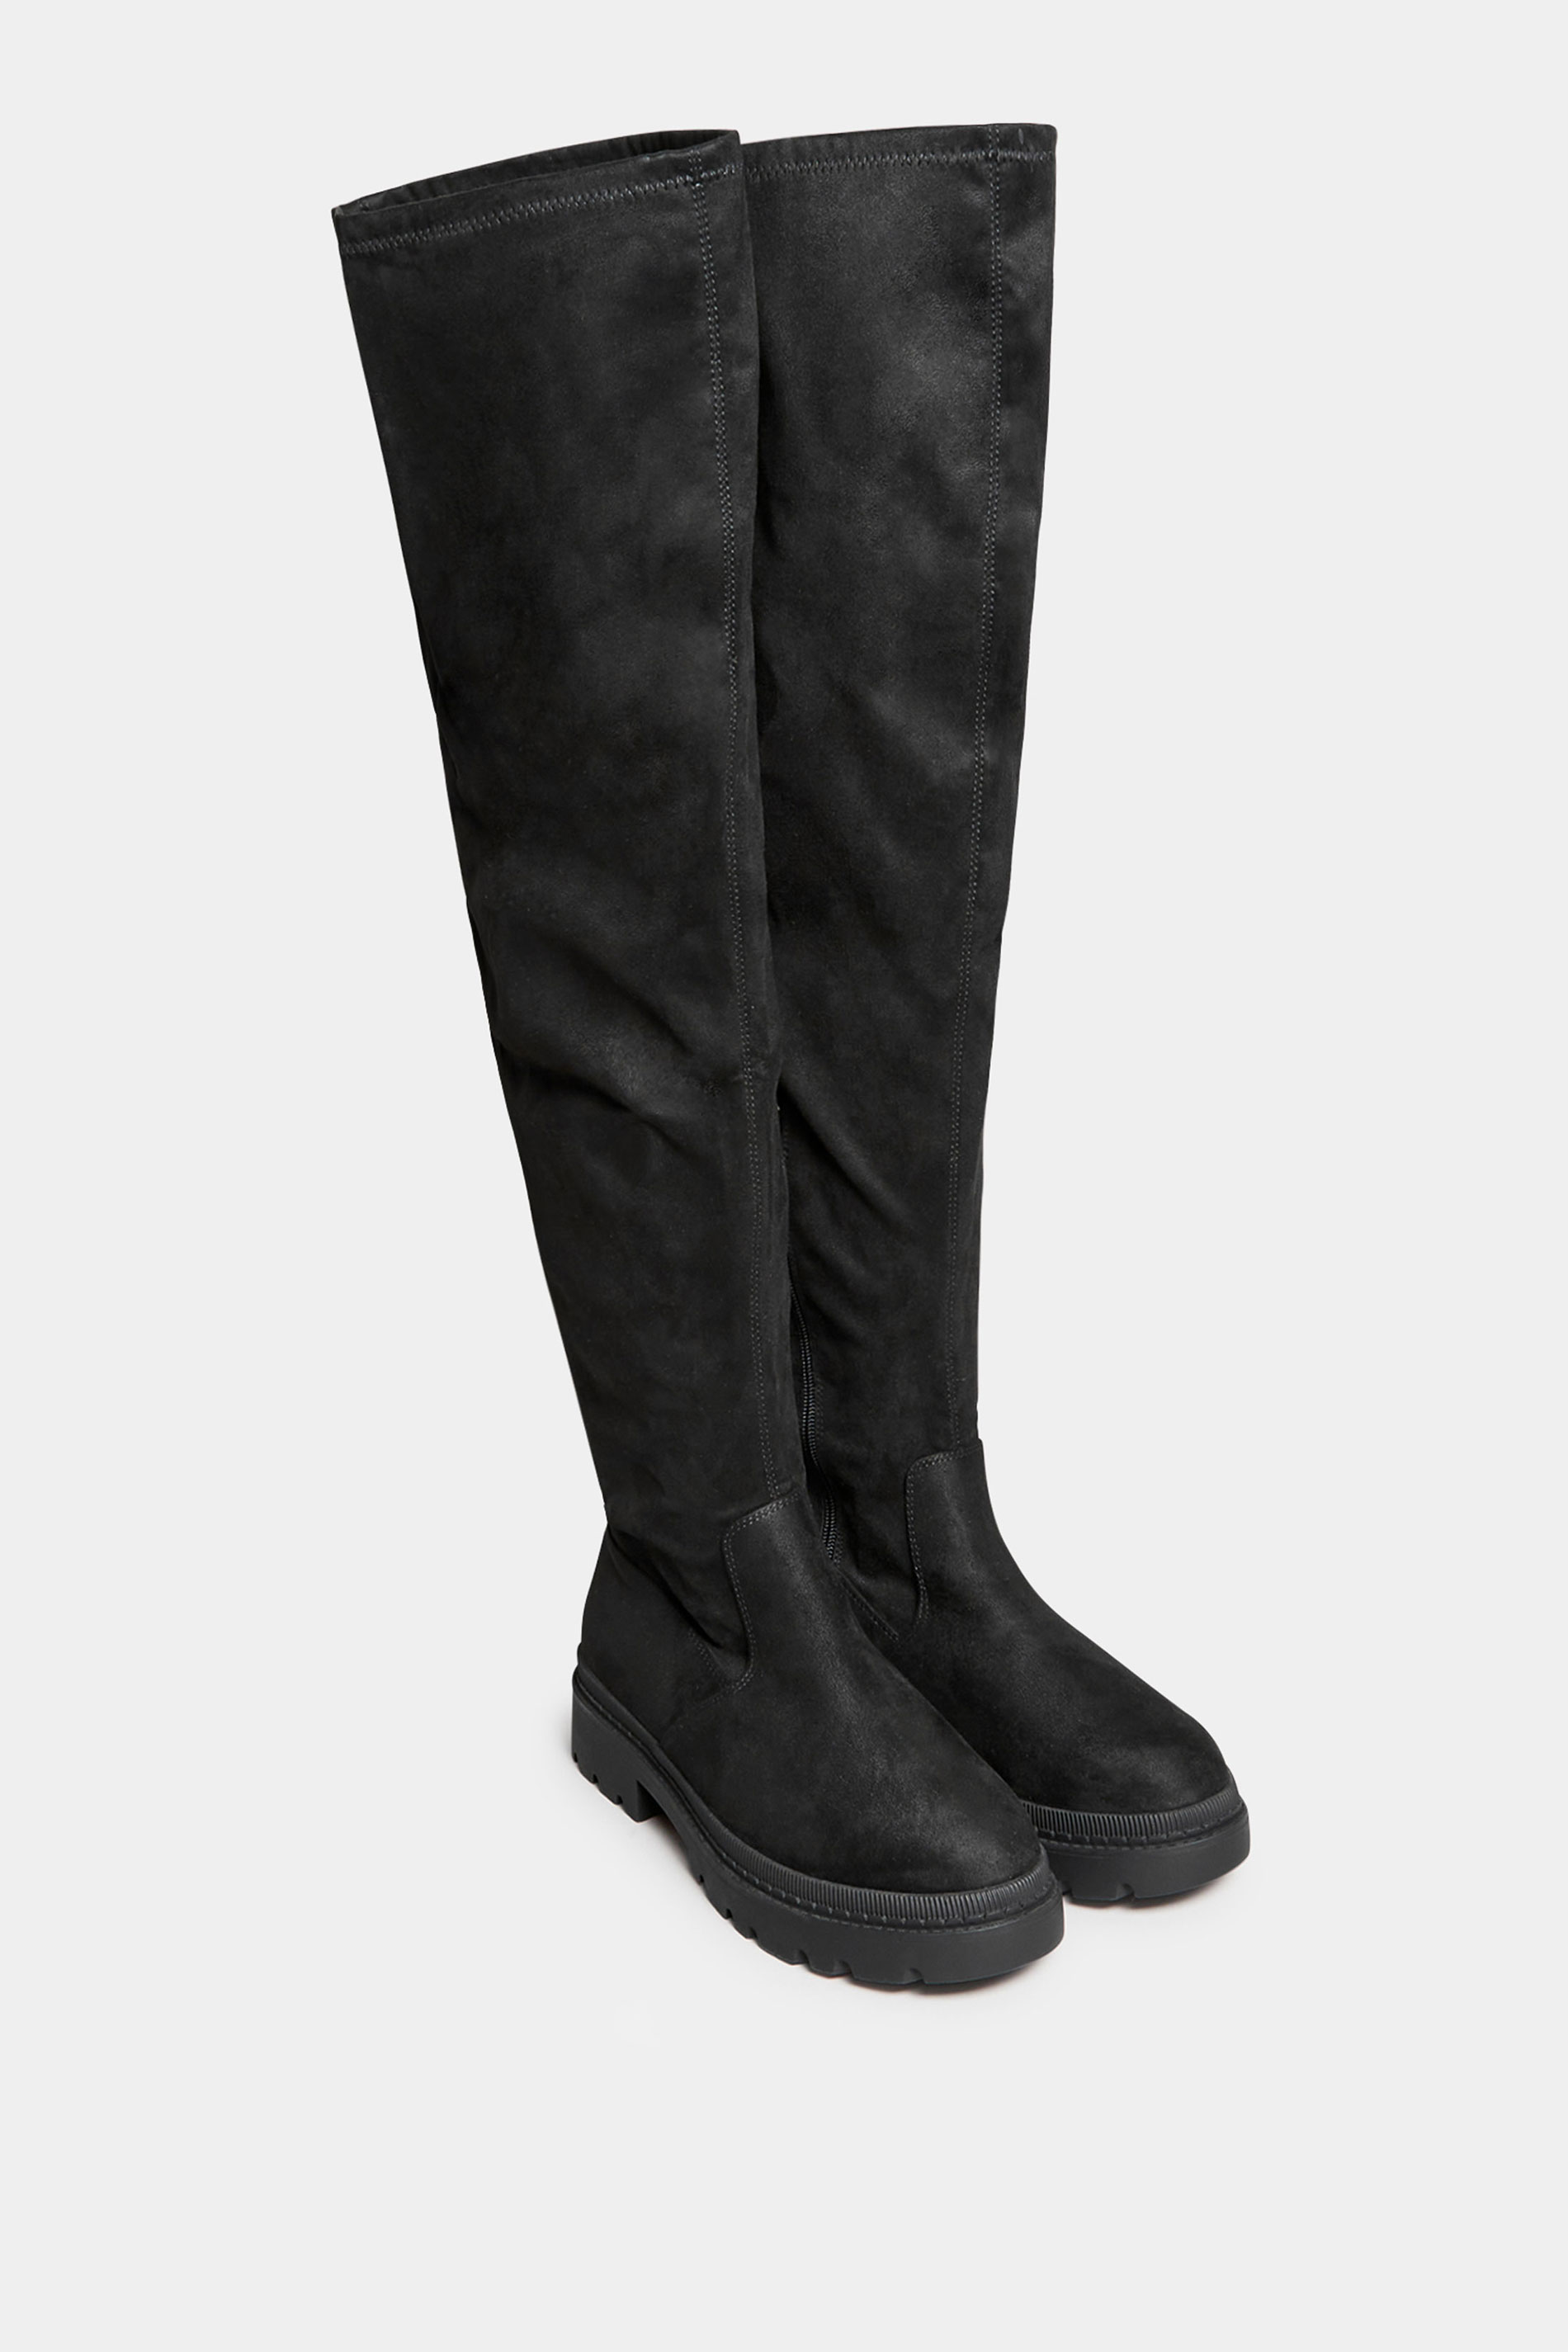 LIMITED COLLECTION Black Chunky Over The Knee Boots In Wide & Extra Wide Fit | Yours Clothing 2